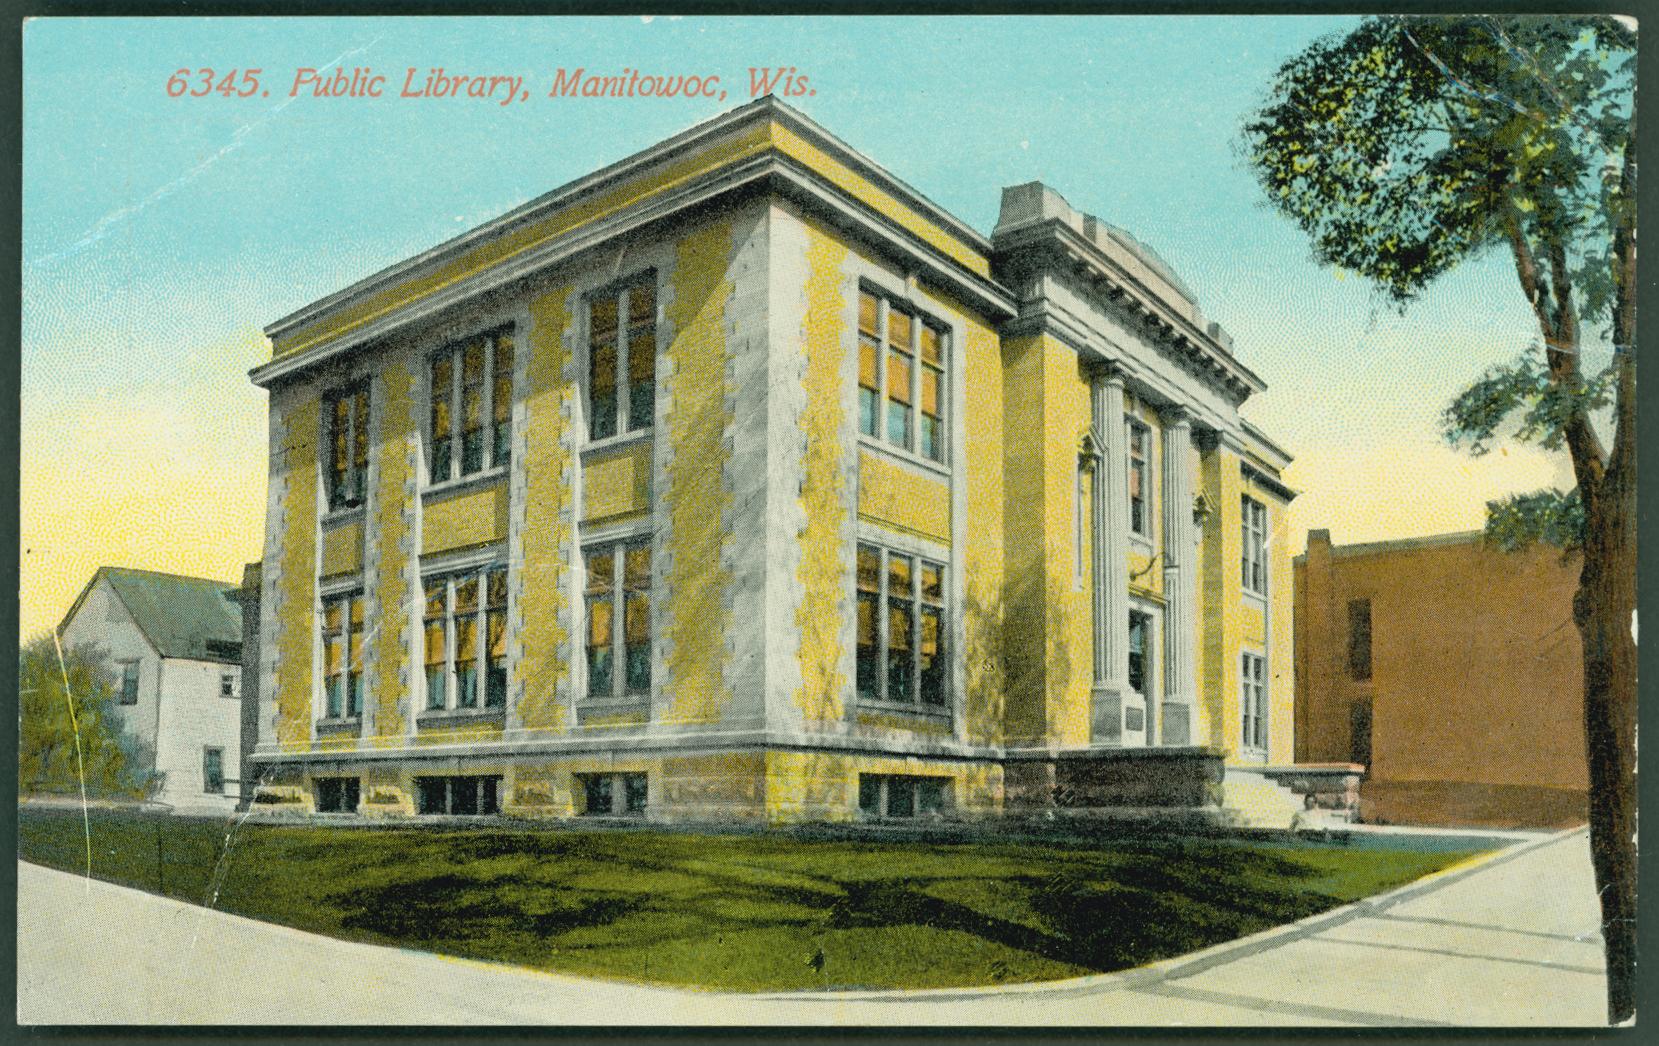 Carnegie Library exterior (colorized)